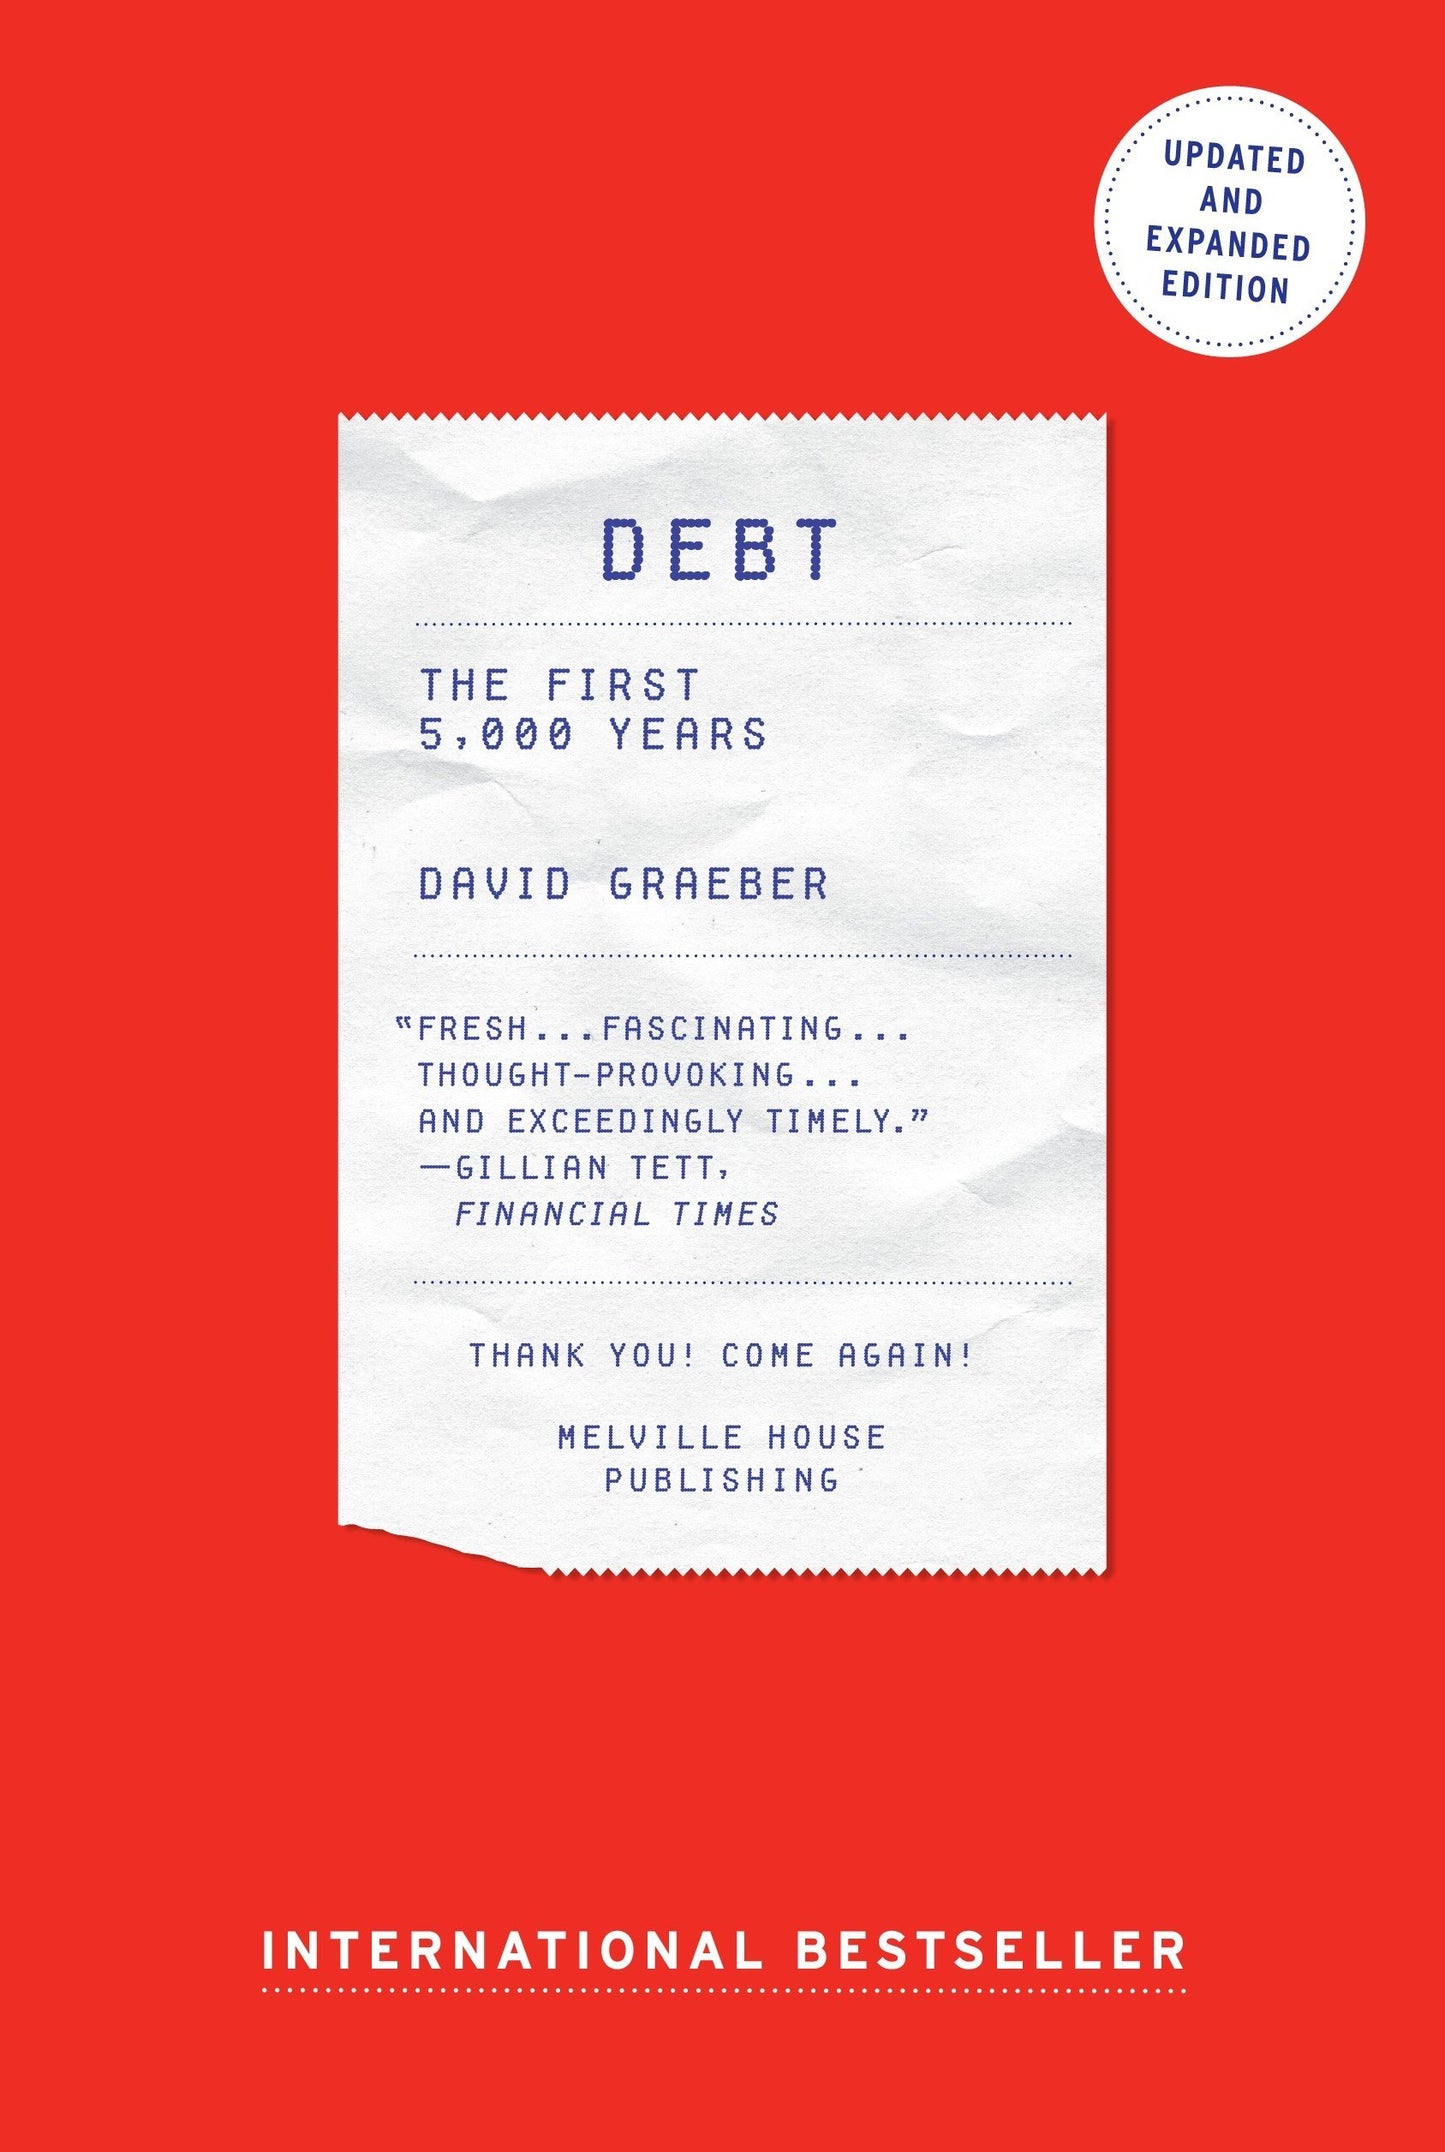 Debt: The First 5,000 Years, by David Graeber